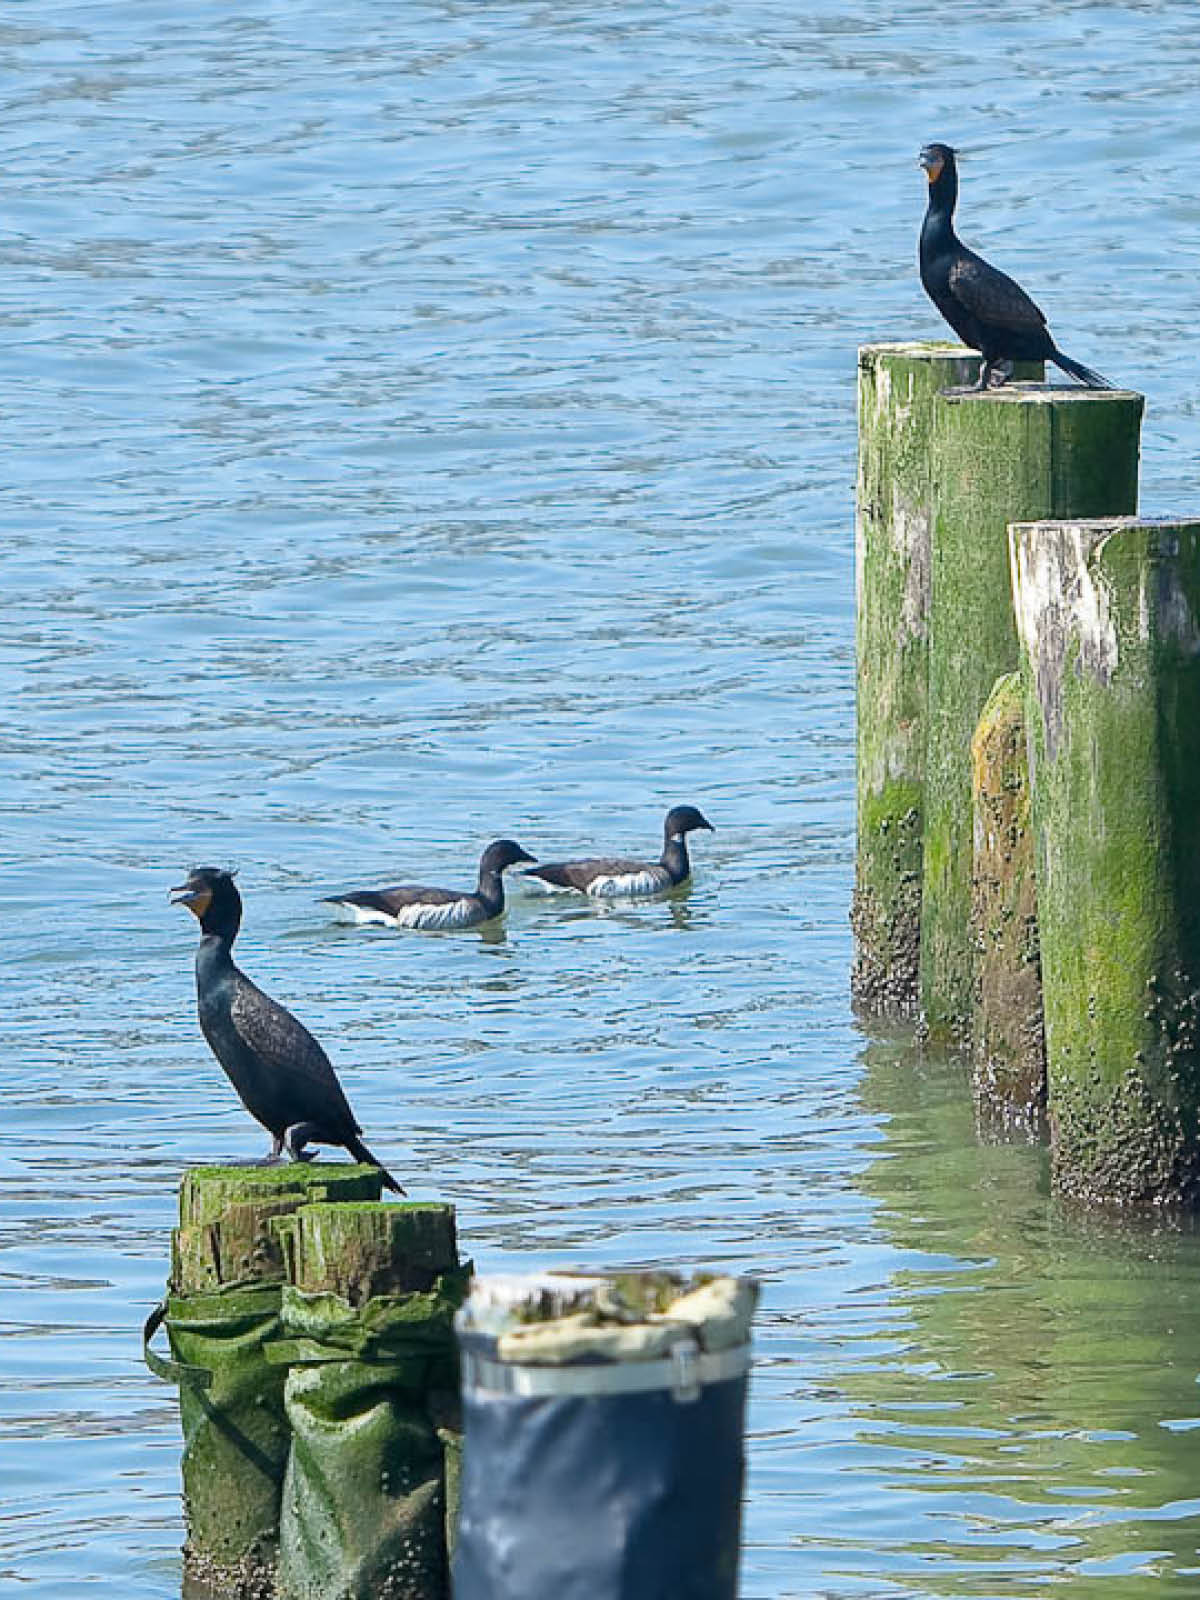 Cormorants sitting on piles in the water on a sunny day.